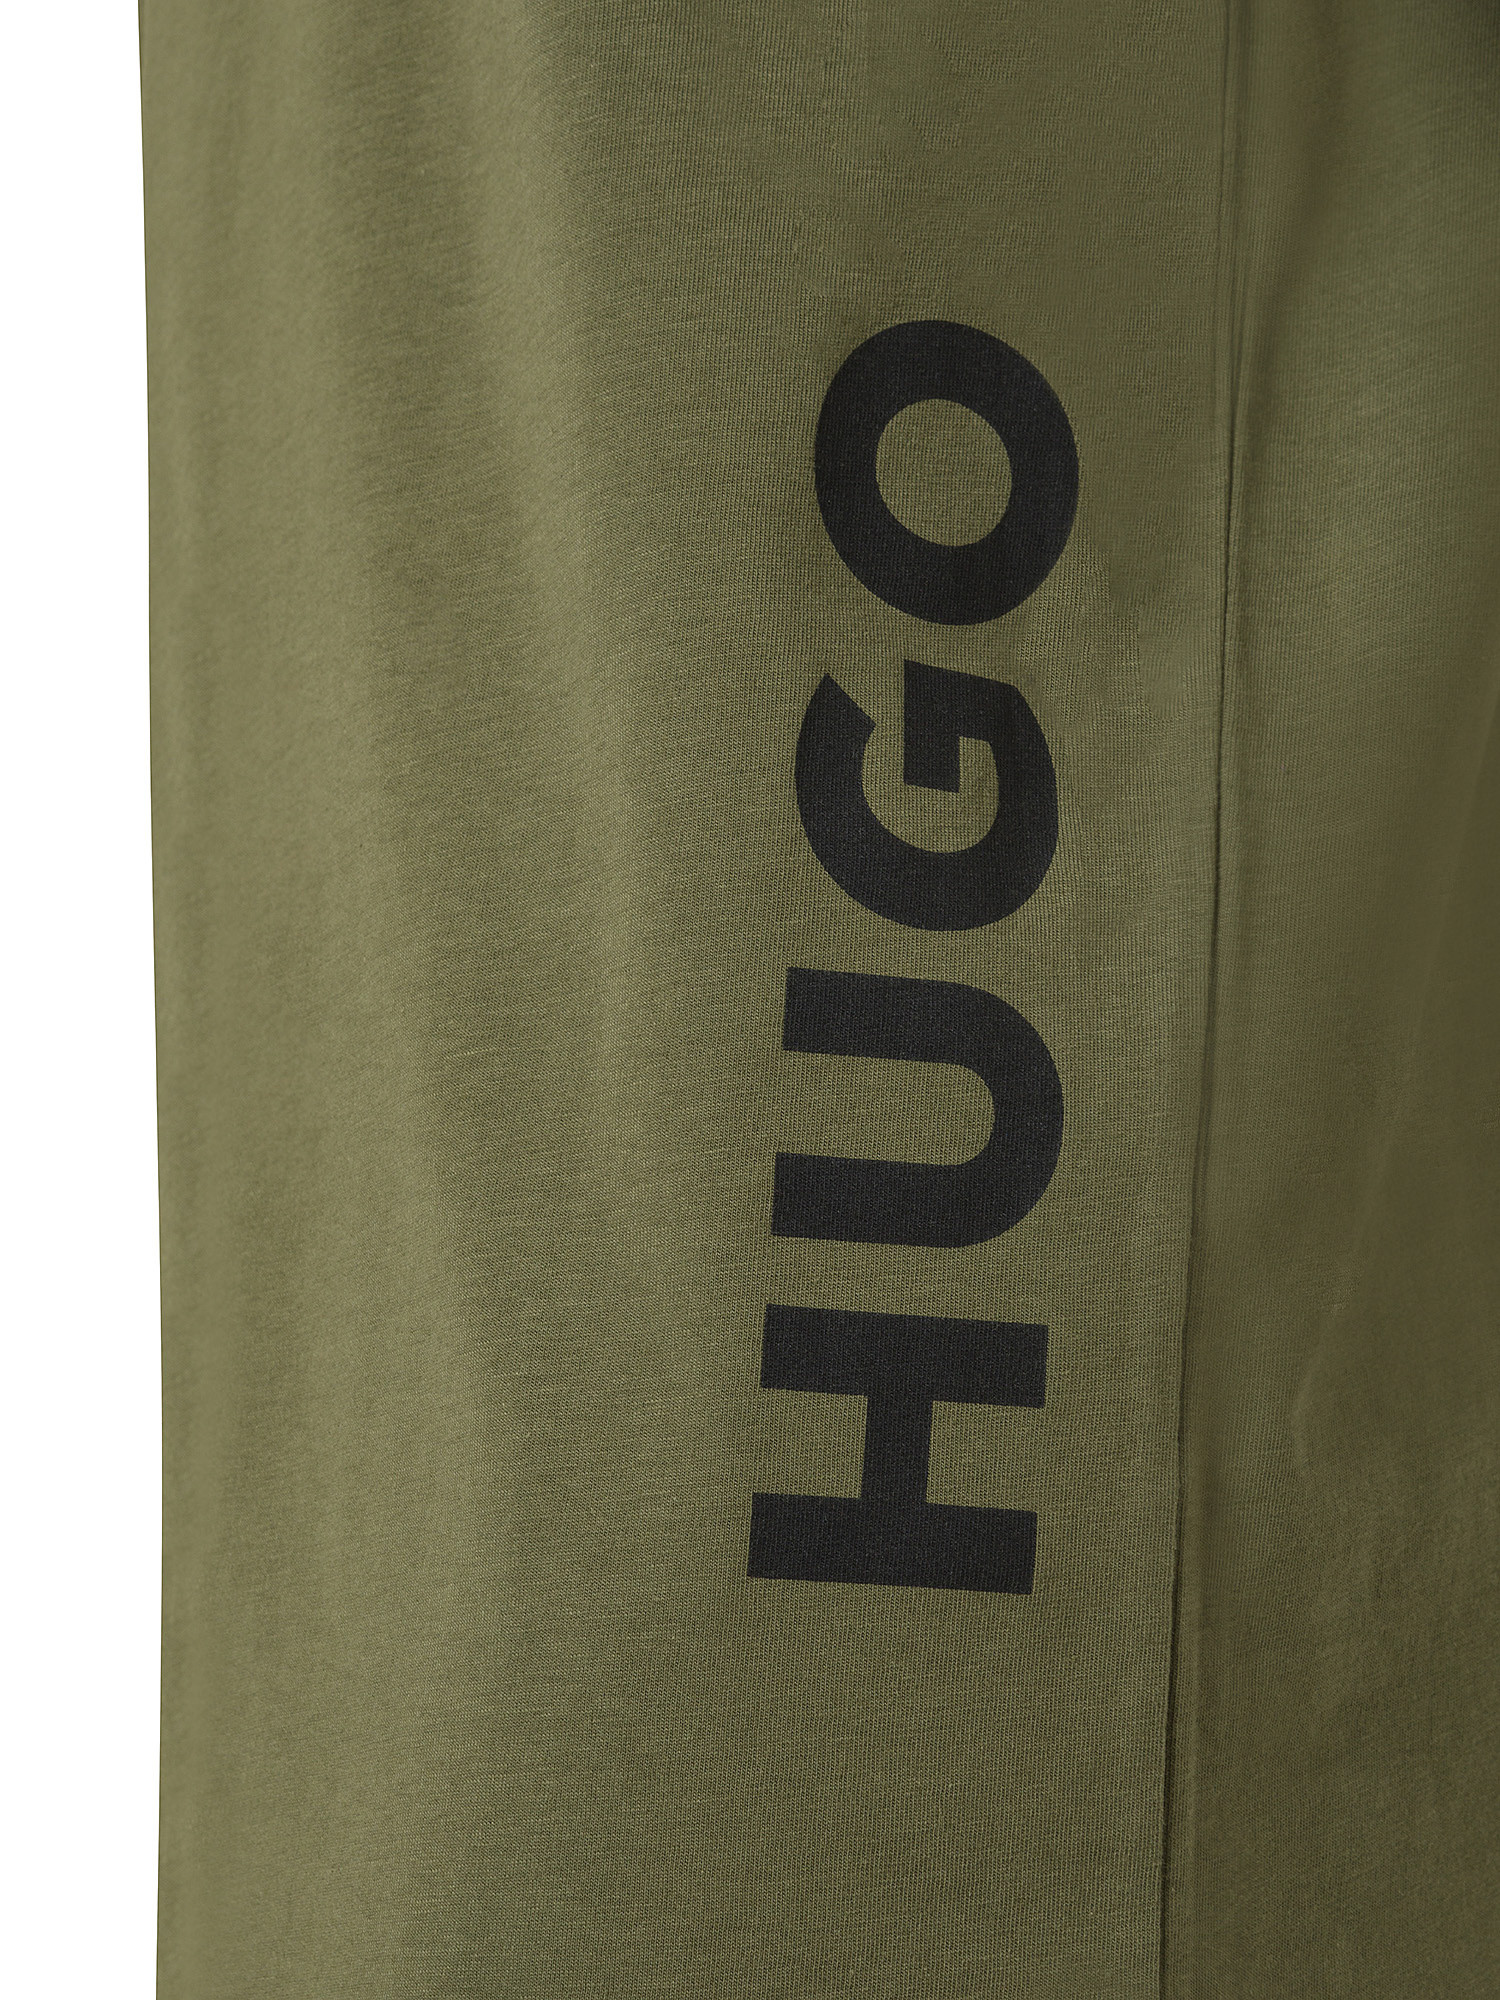 Hugo - T-shirt with logo print in cotton, Dark Green, large image number 2